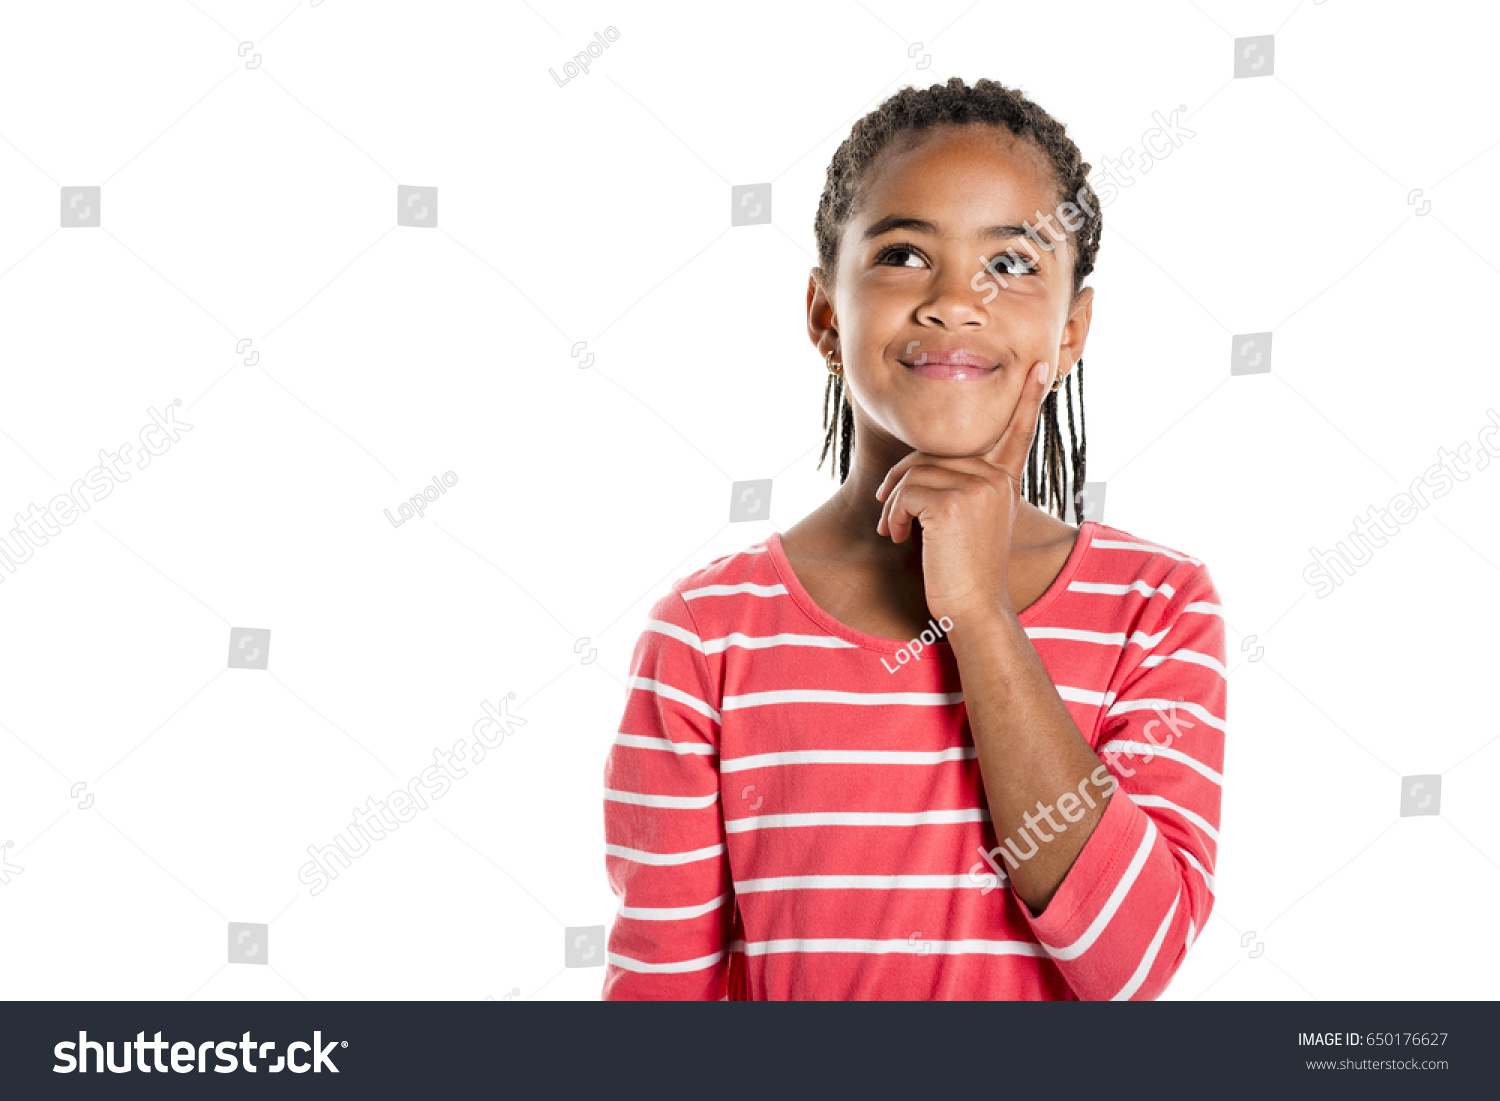 An Adorable african little girl on studio white background #650176627